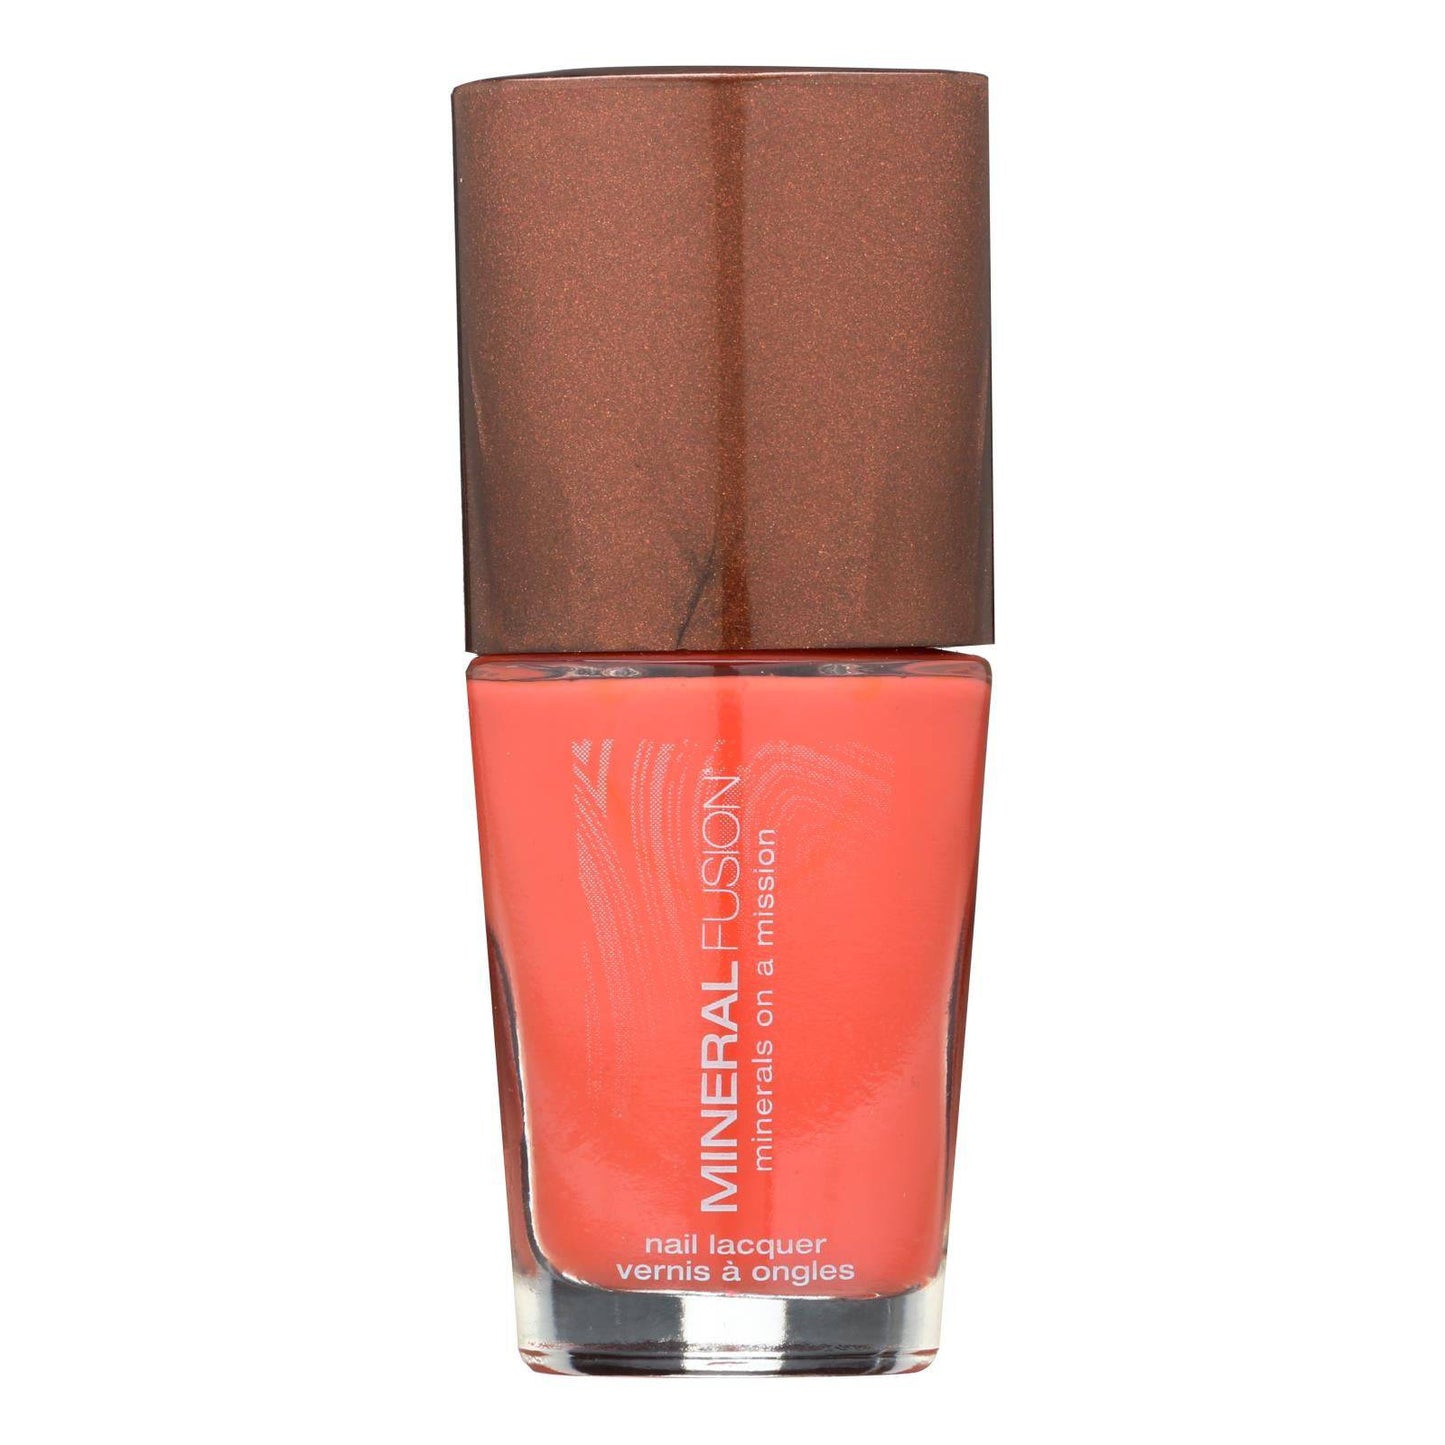 Mineral Fusion - Nail Polish - Sunkissed - 0.33 Oz. | OnlyNaturals.us